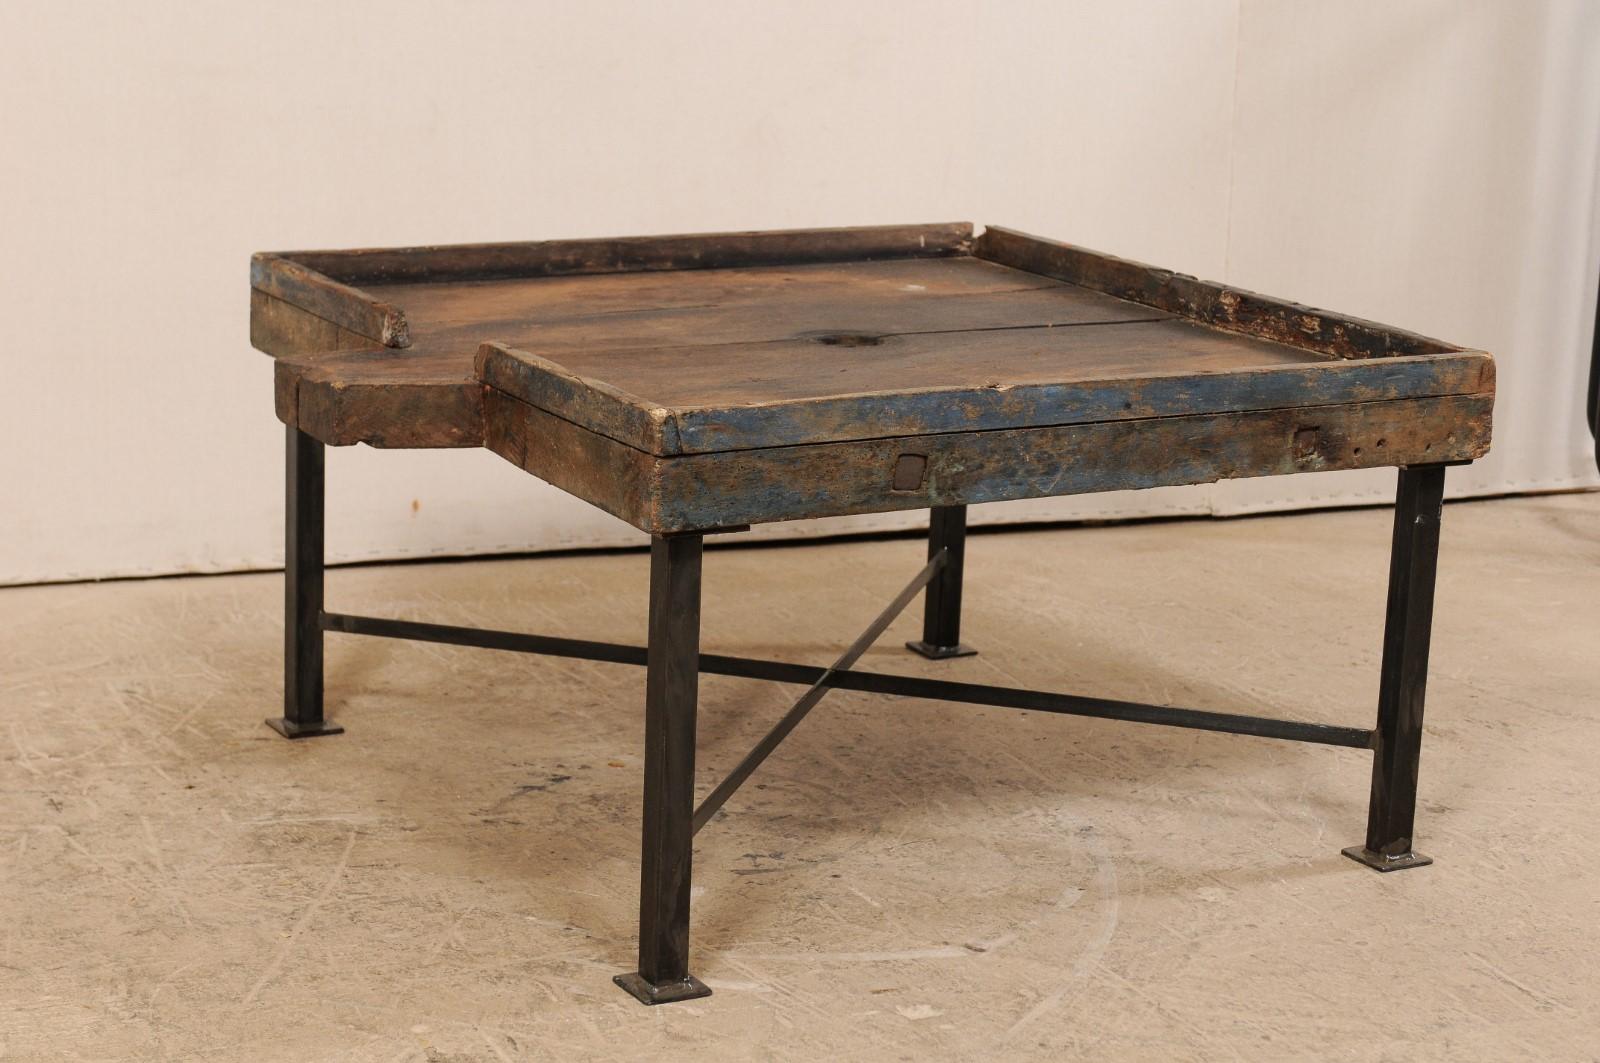 Rustic 19th Century Spanish Wood Olive Trough Coffee Table with Modern Metal Base